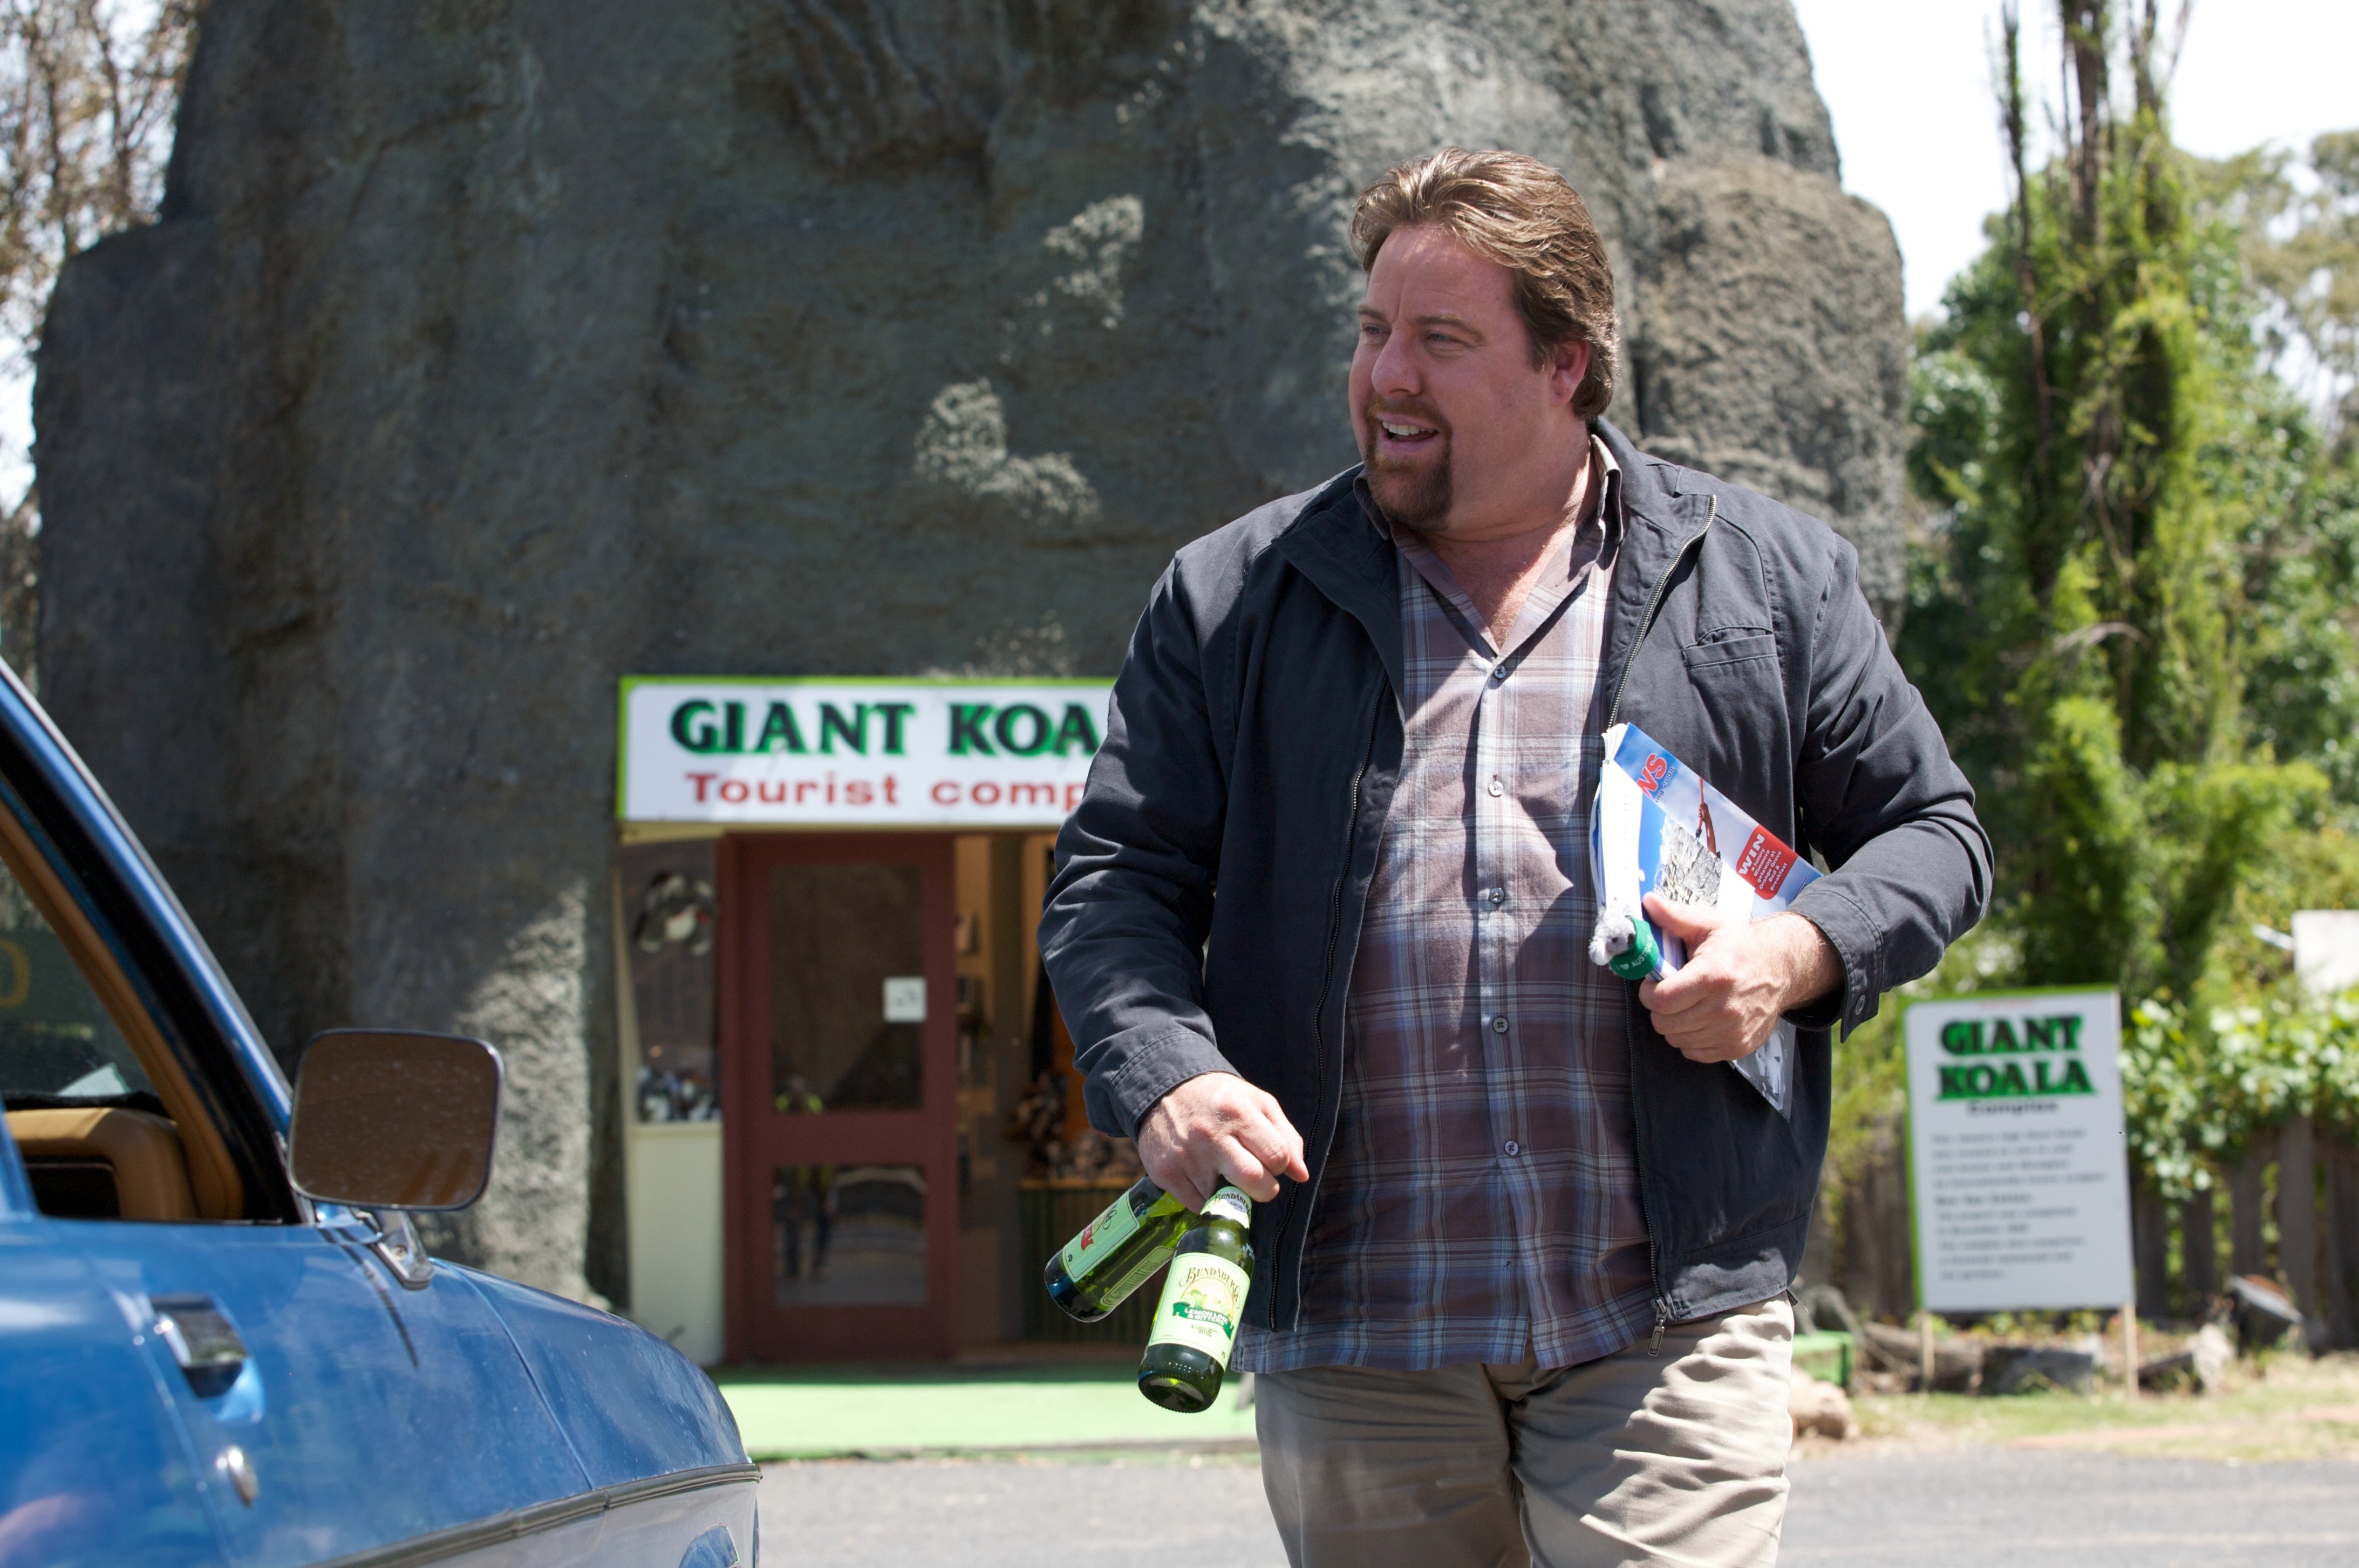 Shane Jacobson in Charlie & Boots (2009)